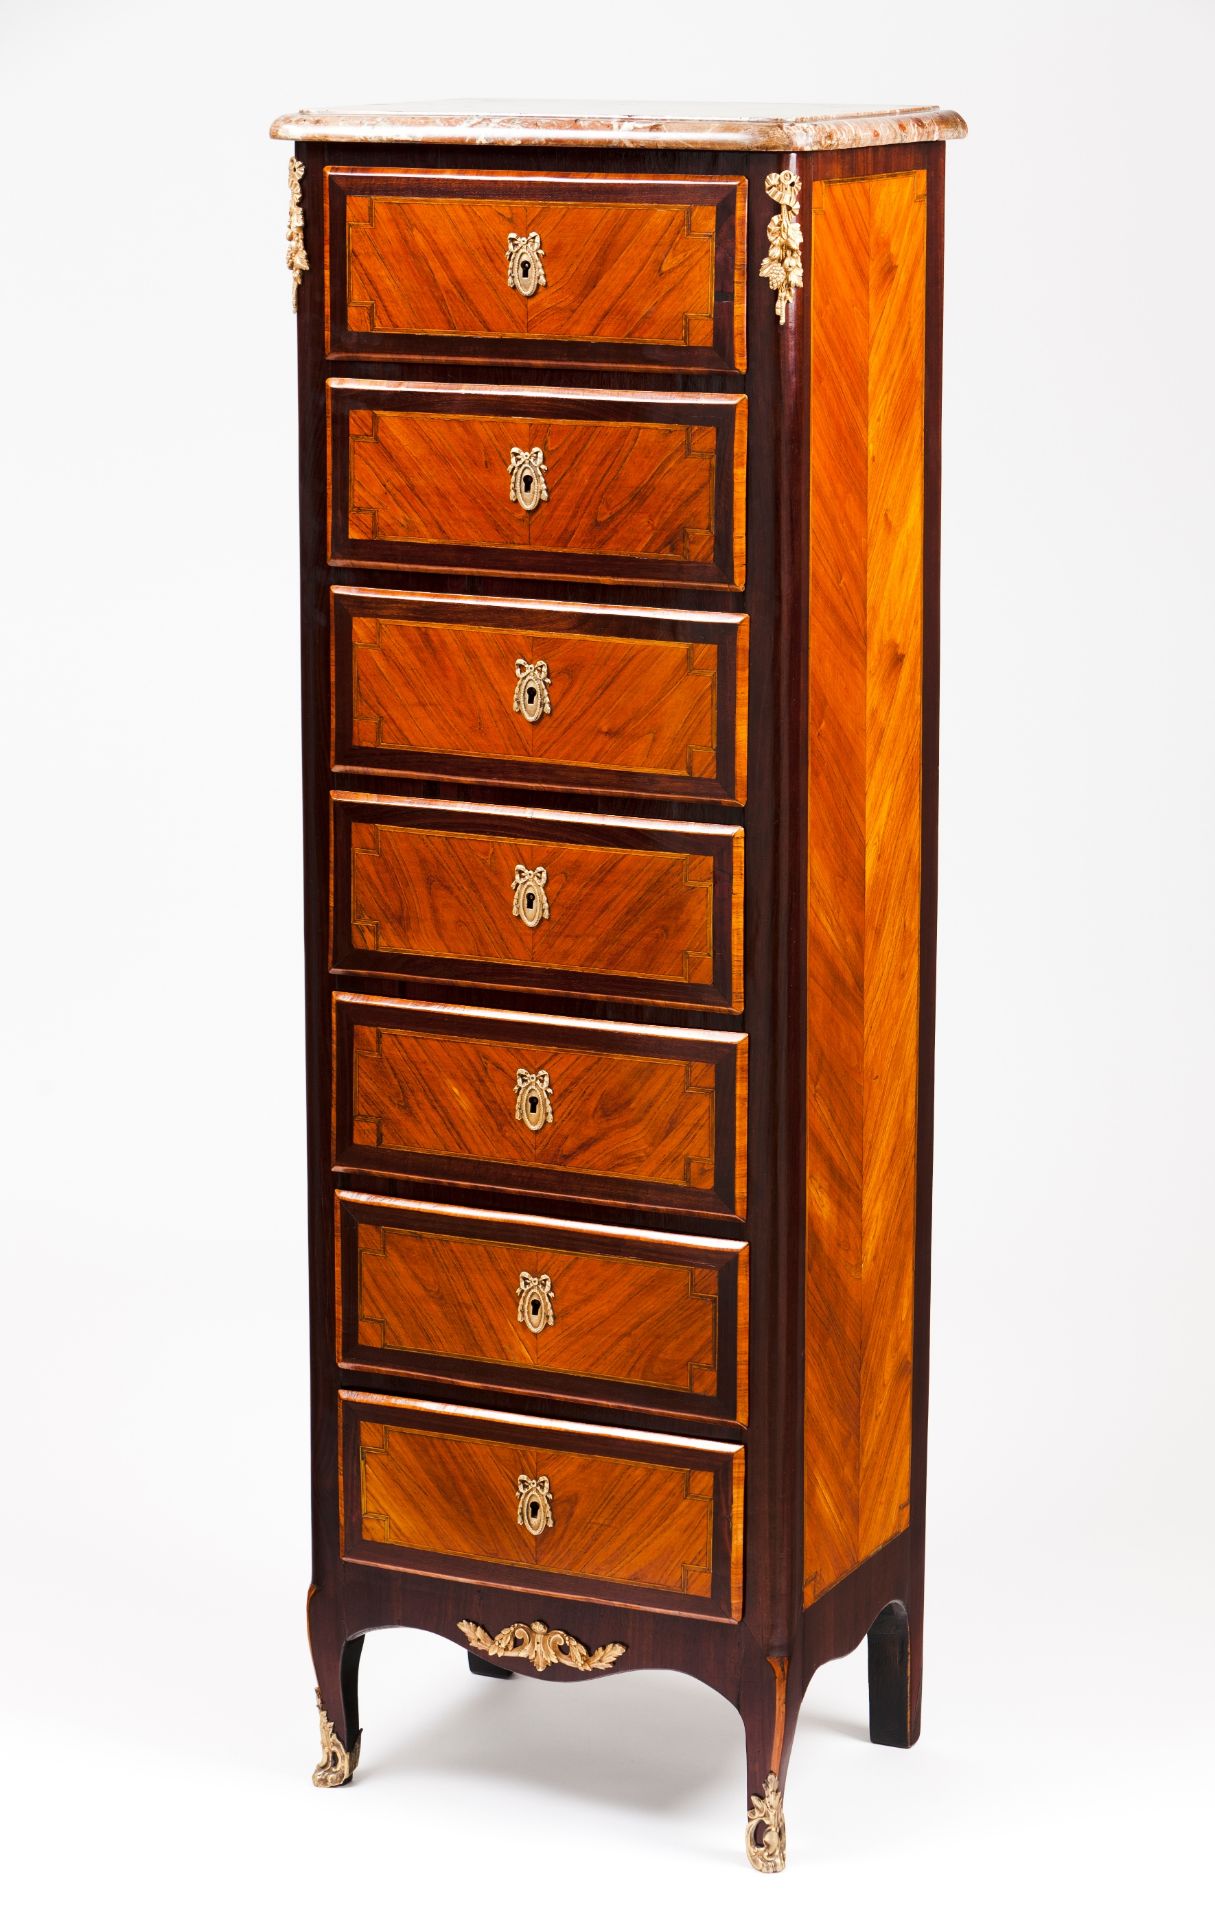 A Louis XV style tall cabinet